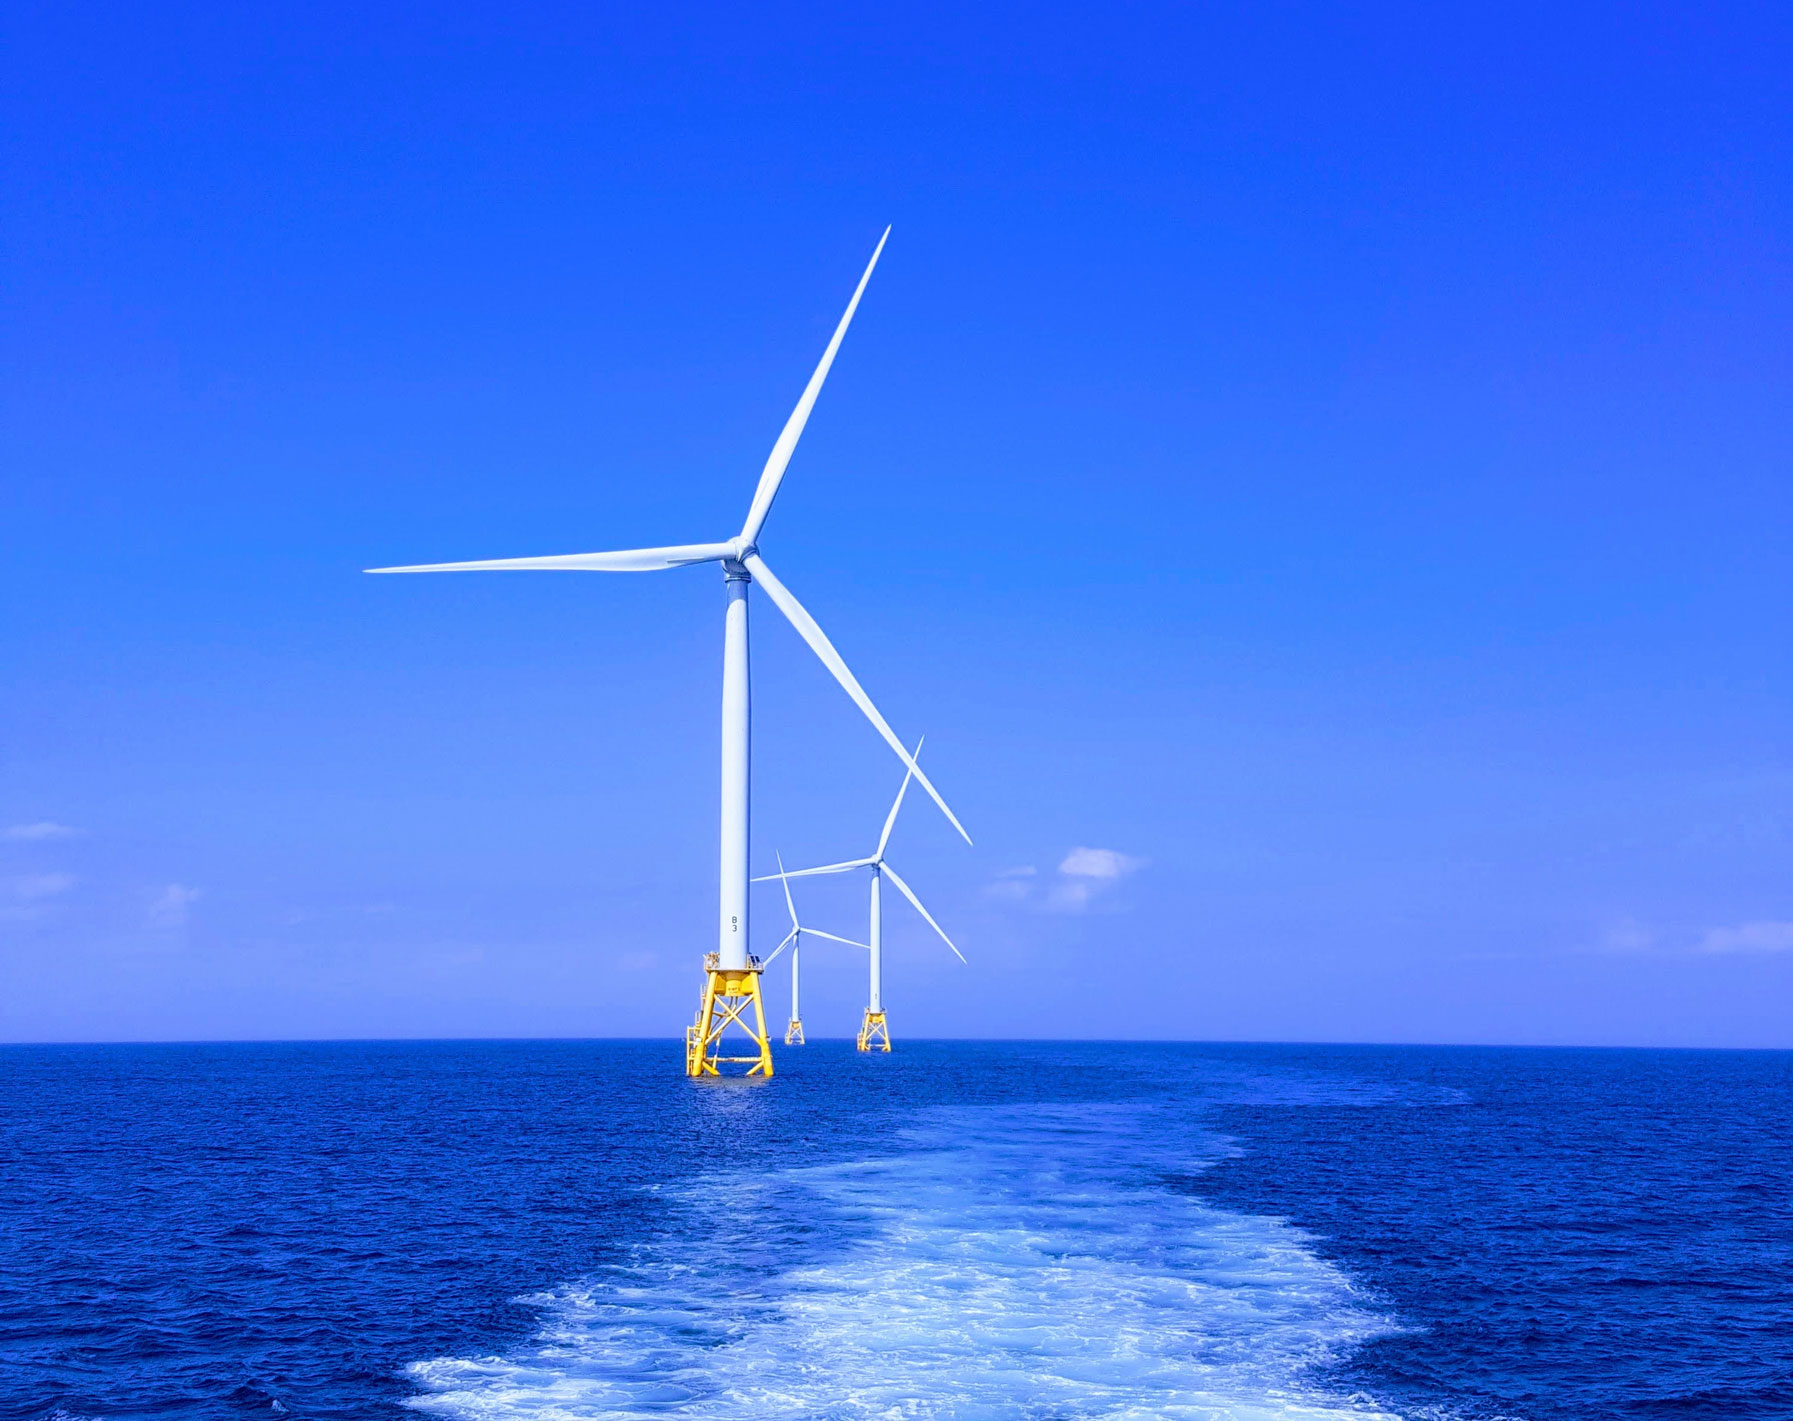 Why It Matters: Hybridisation and electrification crucial to the maritime industry